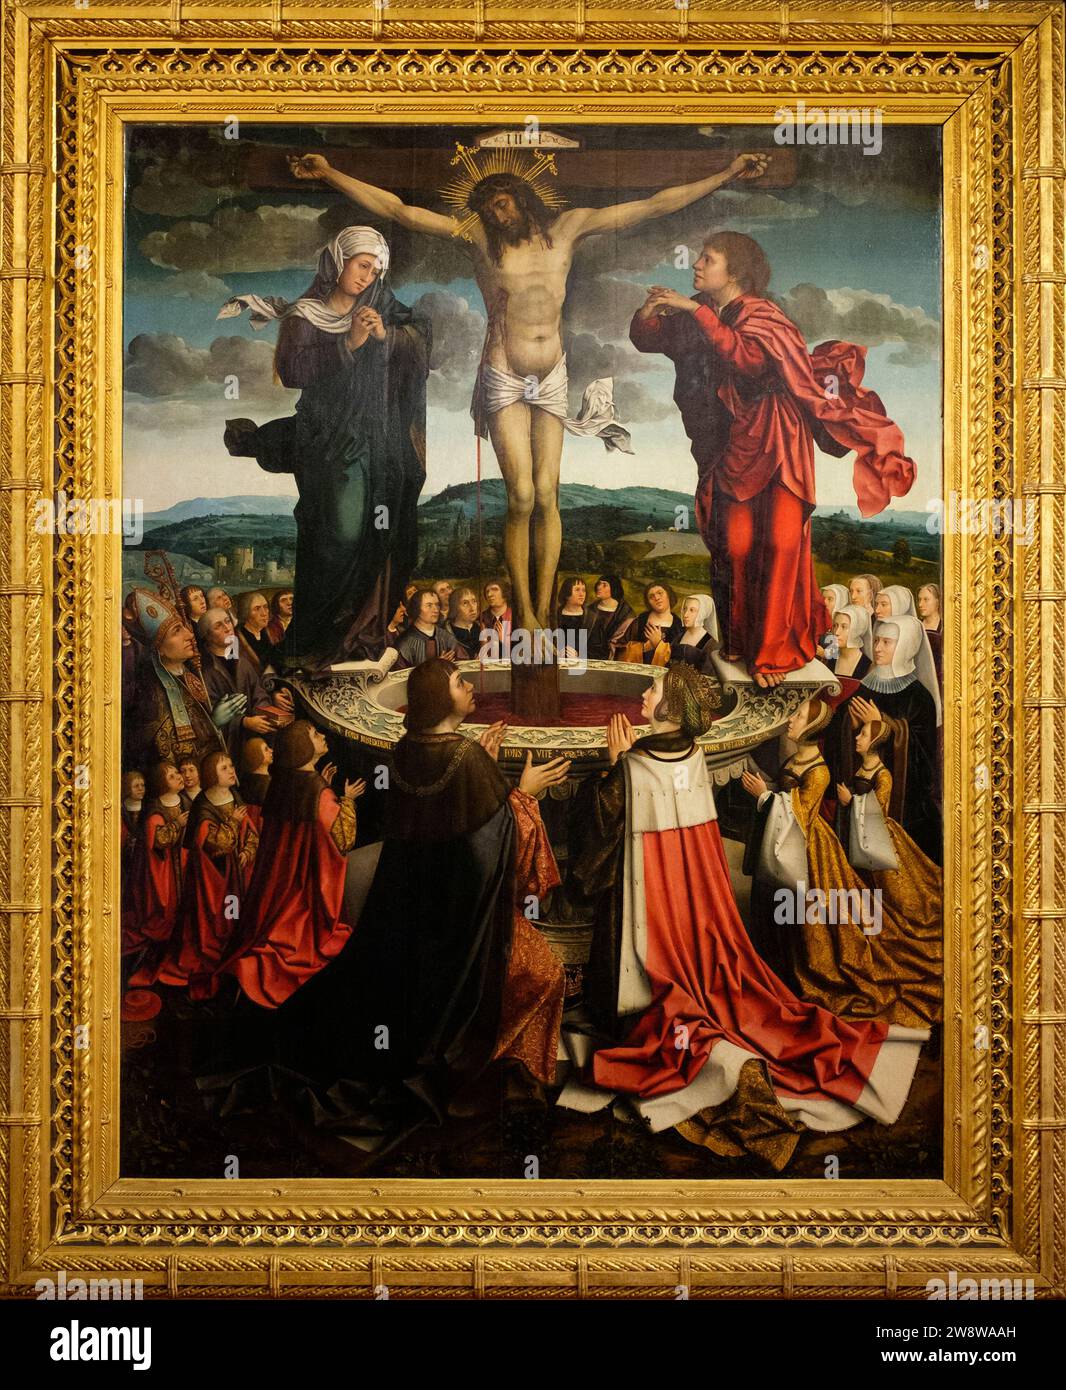 Portugal: Fons Vitae (Fountain of Life) c.1515-17, painting by Colijn de Coter (c. 1440 - c. 1532), oil on oak wood and originating in Flanders, now in the Museu da Misericórdia do Porto, Porto.  At the centre left, kneeling, is King Manuel I of Portugal. To the centre right is Maria of Aragon, followed by Isabella of Portugal and Beatrice of Portugal, the Duchess of Savoy. Stock Photo